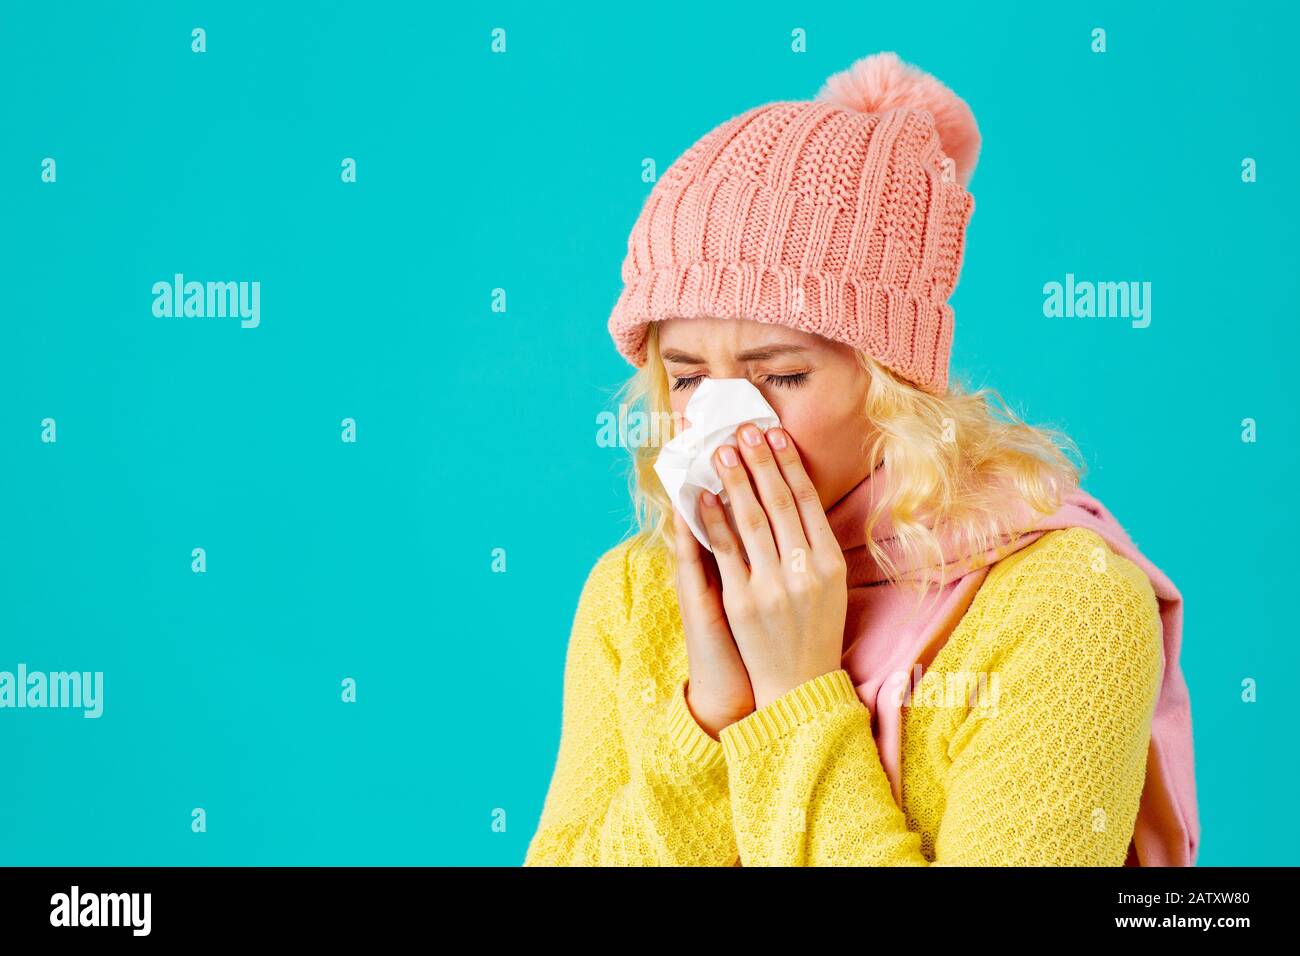 Cold and flu season- portrait of a woman in hat and scarf blowing her nose Stock Photo